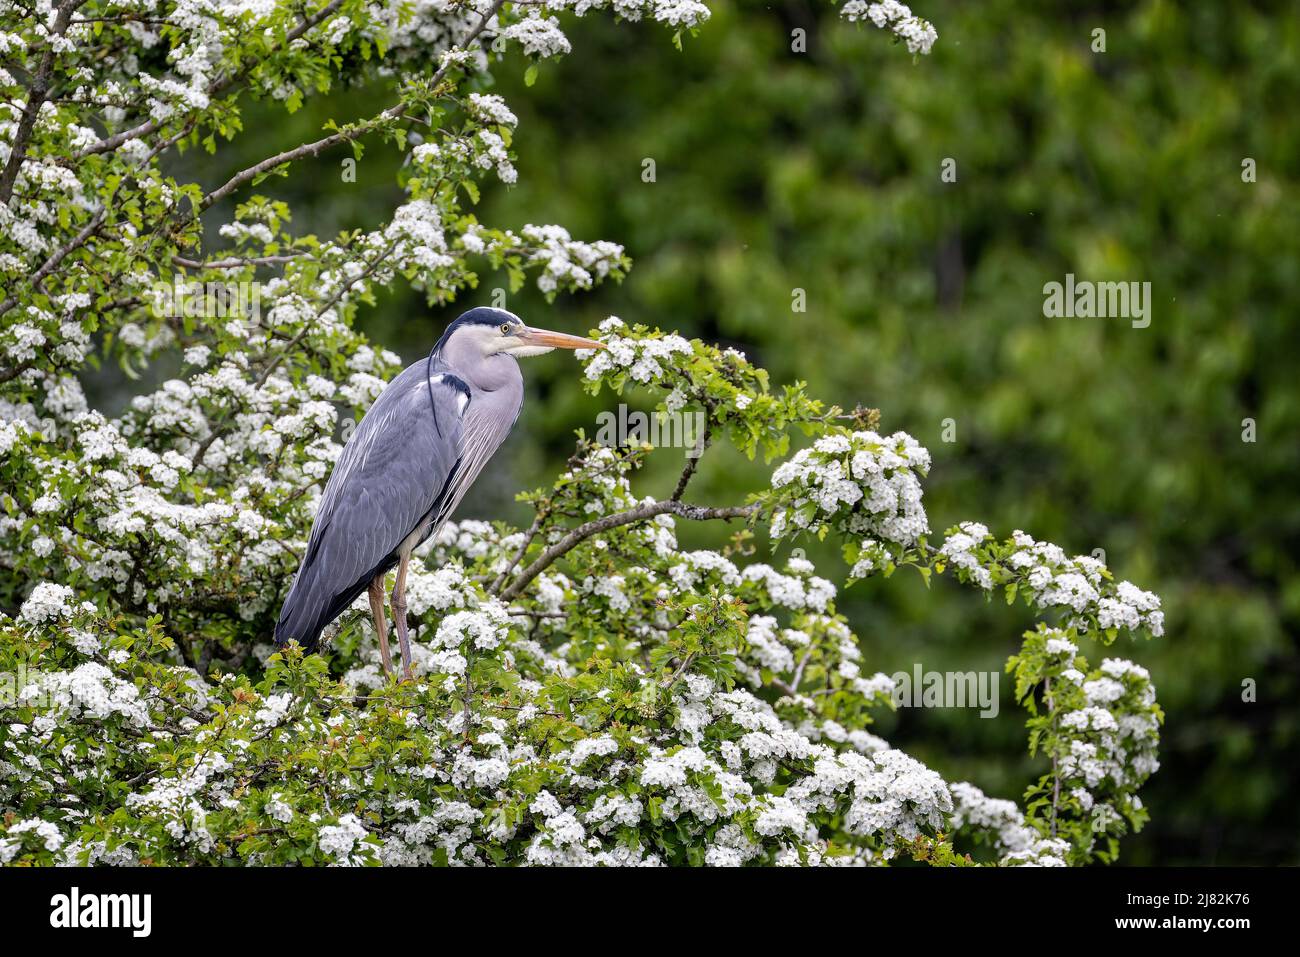 Close up of a Grey Heron perched in a tree full of white blossom - landscape format Stock Photo